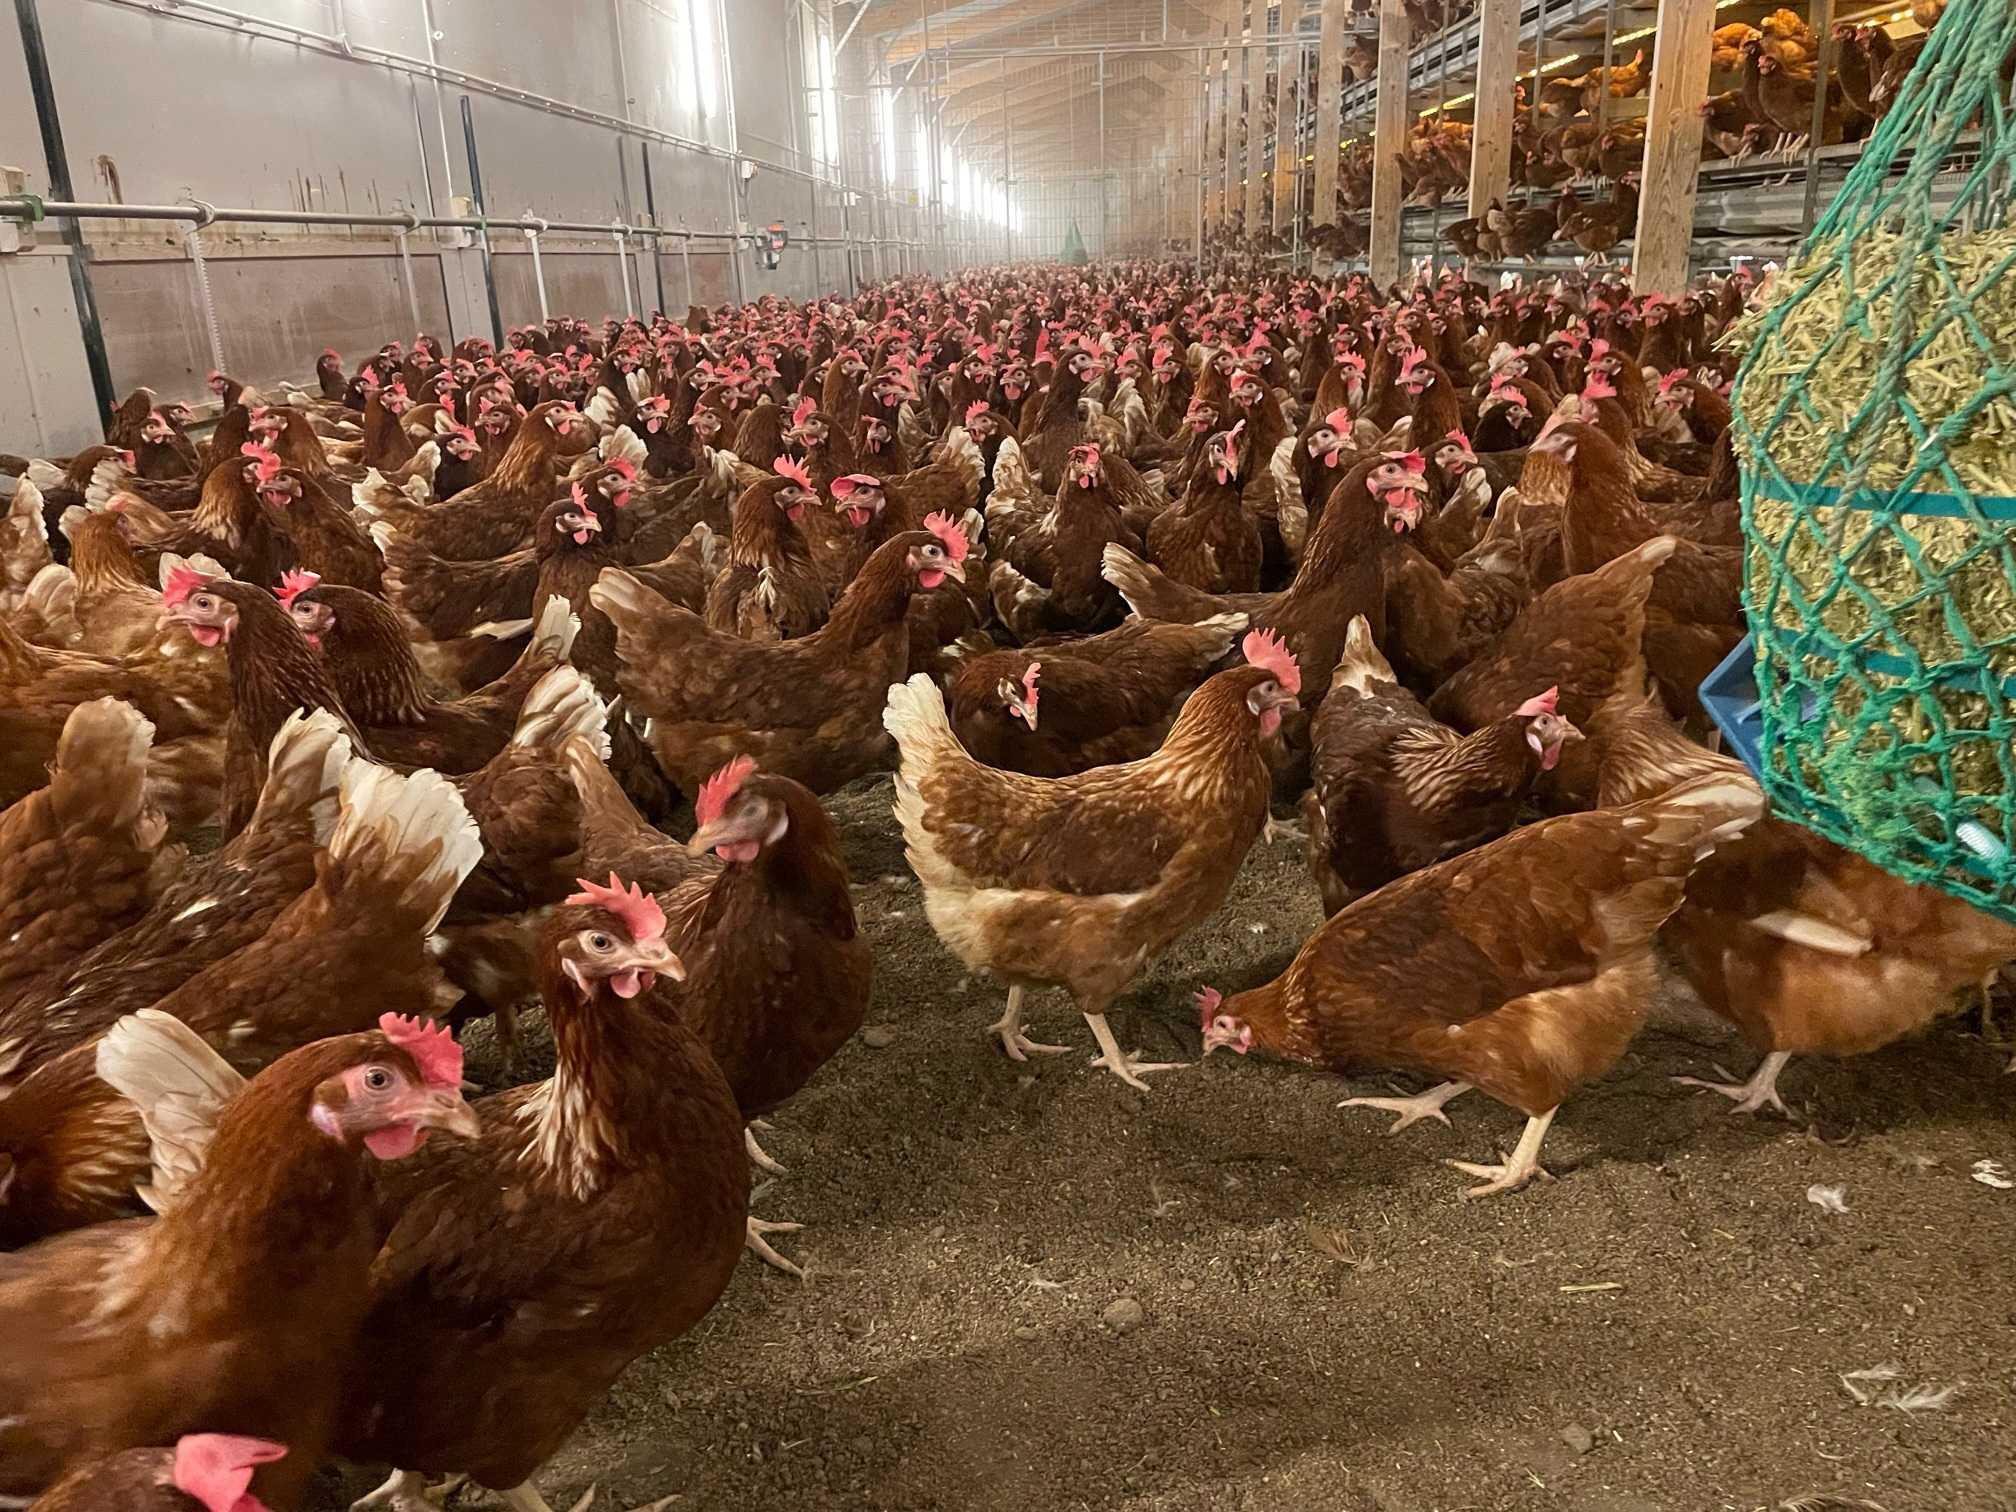 Free range hens under cover at Daniel Brown's family farm at Bury St Edmunds, Suffolk, eastern England Nov 21. Photo: Reuters